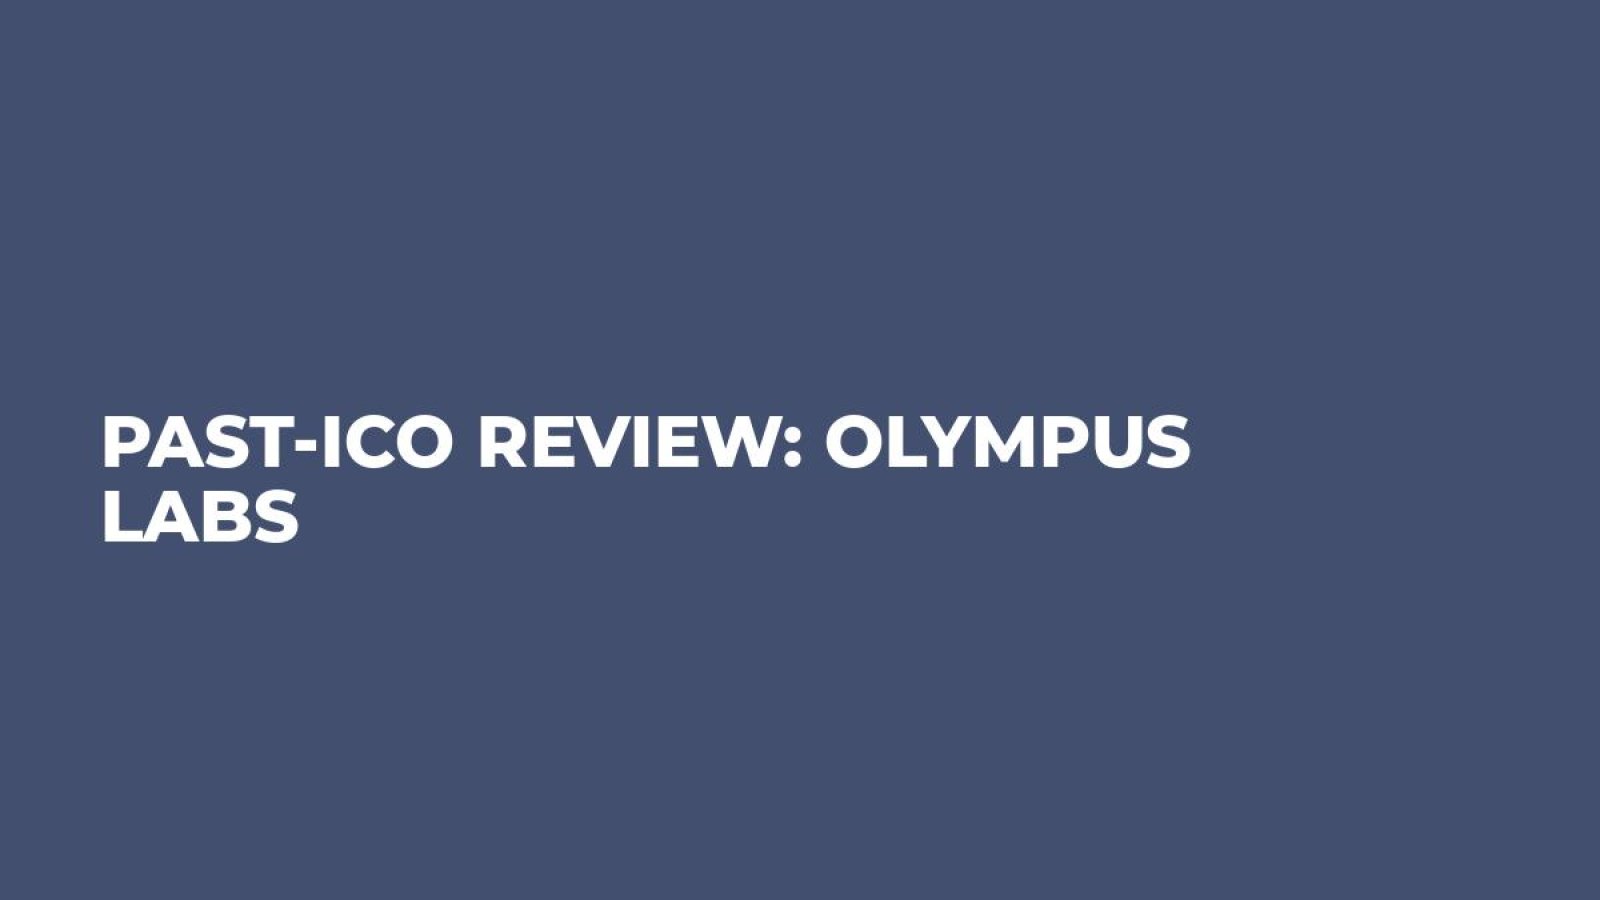 Past-ICO Review: Olympus Labs